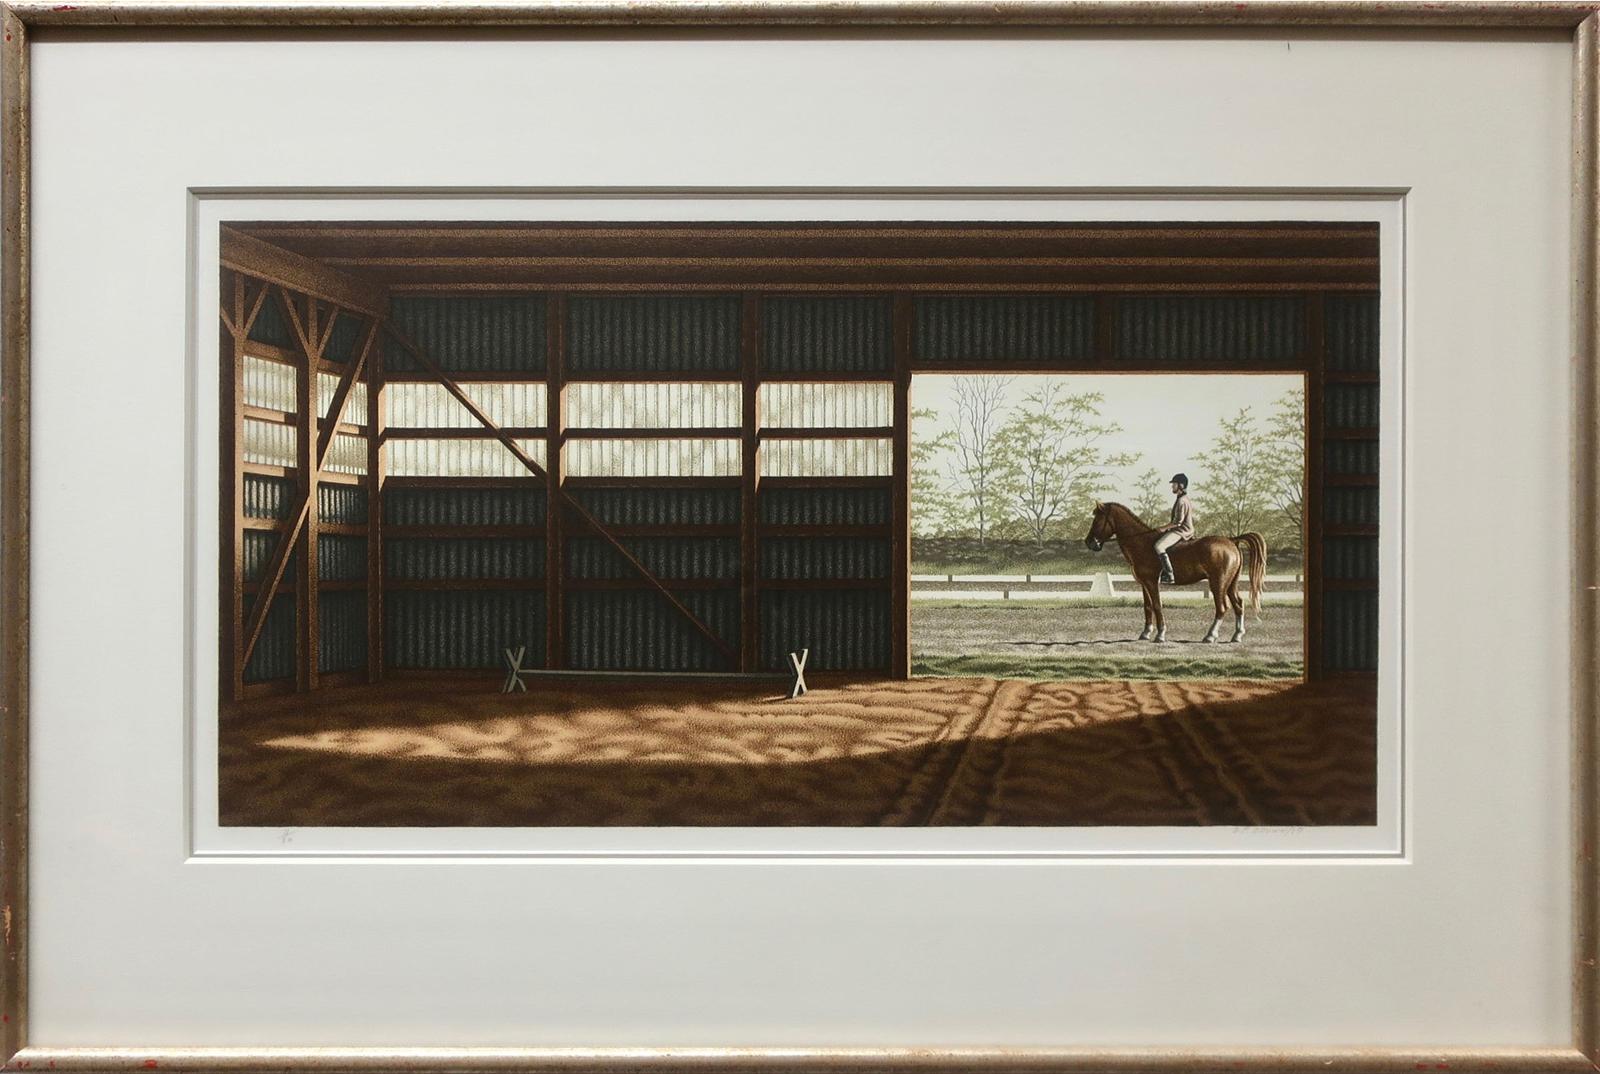 Daniel Price (D.P.) Erichsen Brown (1939) - Untitled (Outside The Stable)